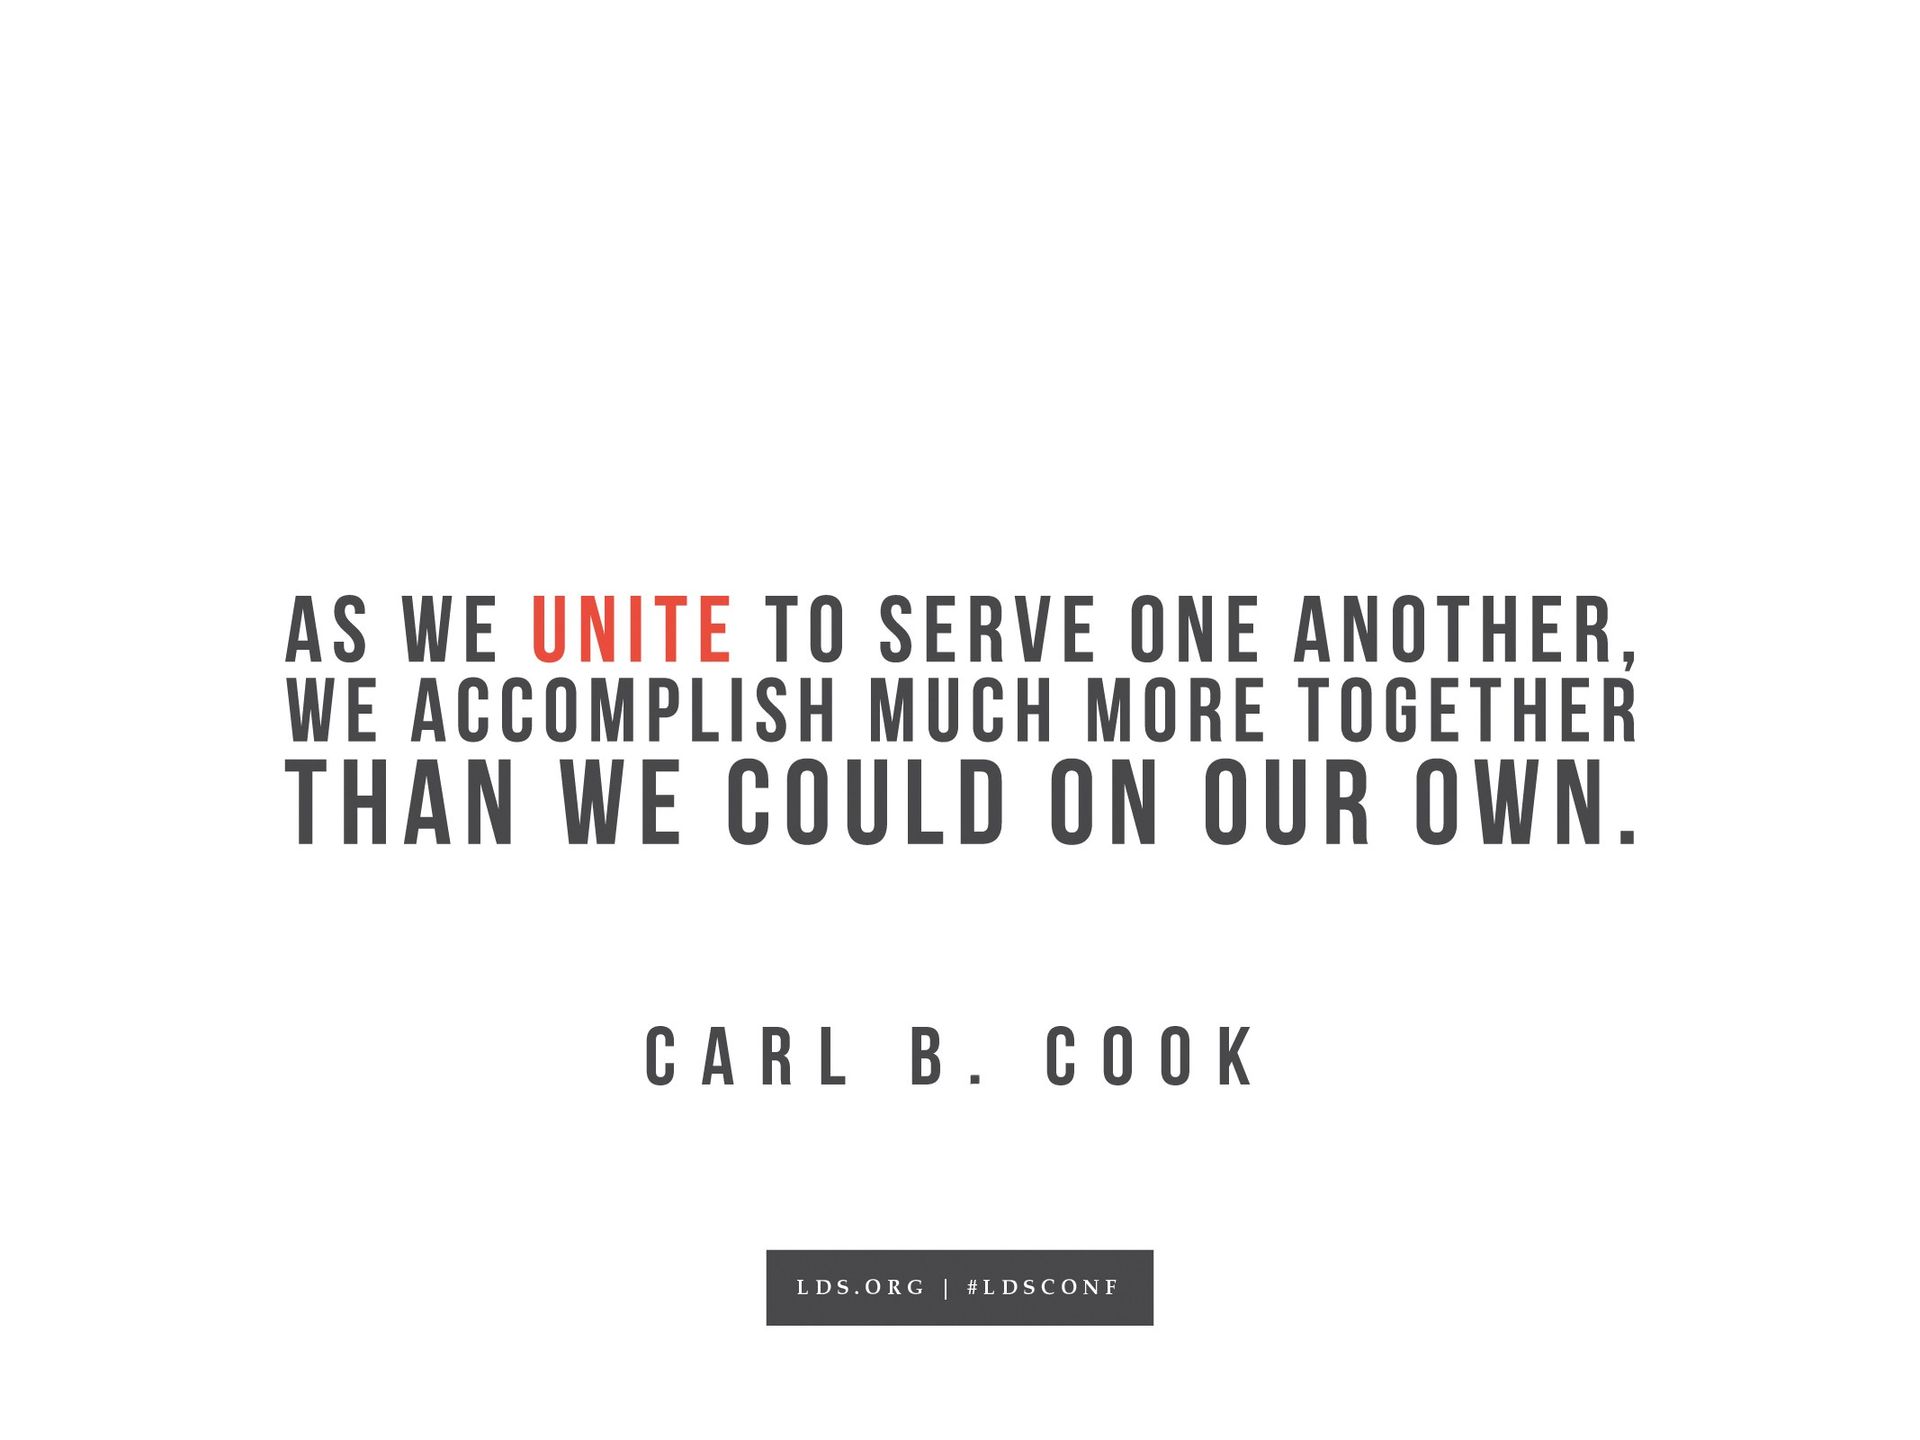 “As we unite to serve one another, we accomplish much more together than we could on our own.”—Carl B. Cook, “Serve”